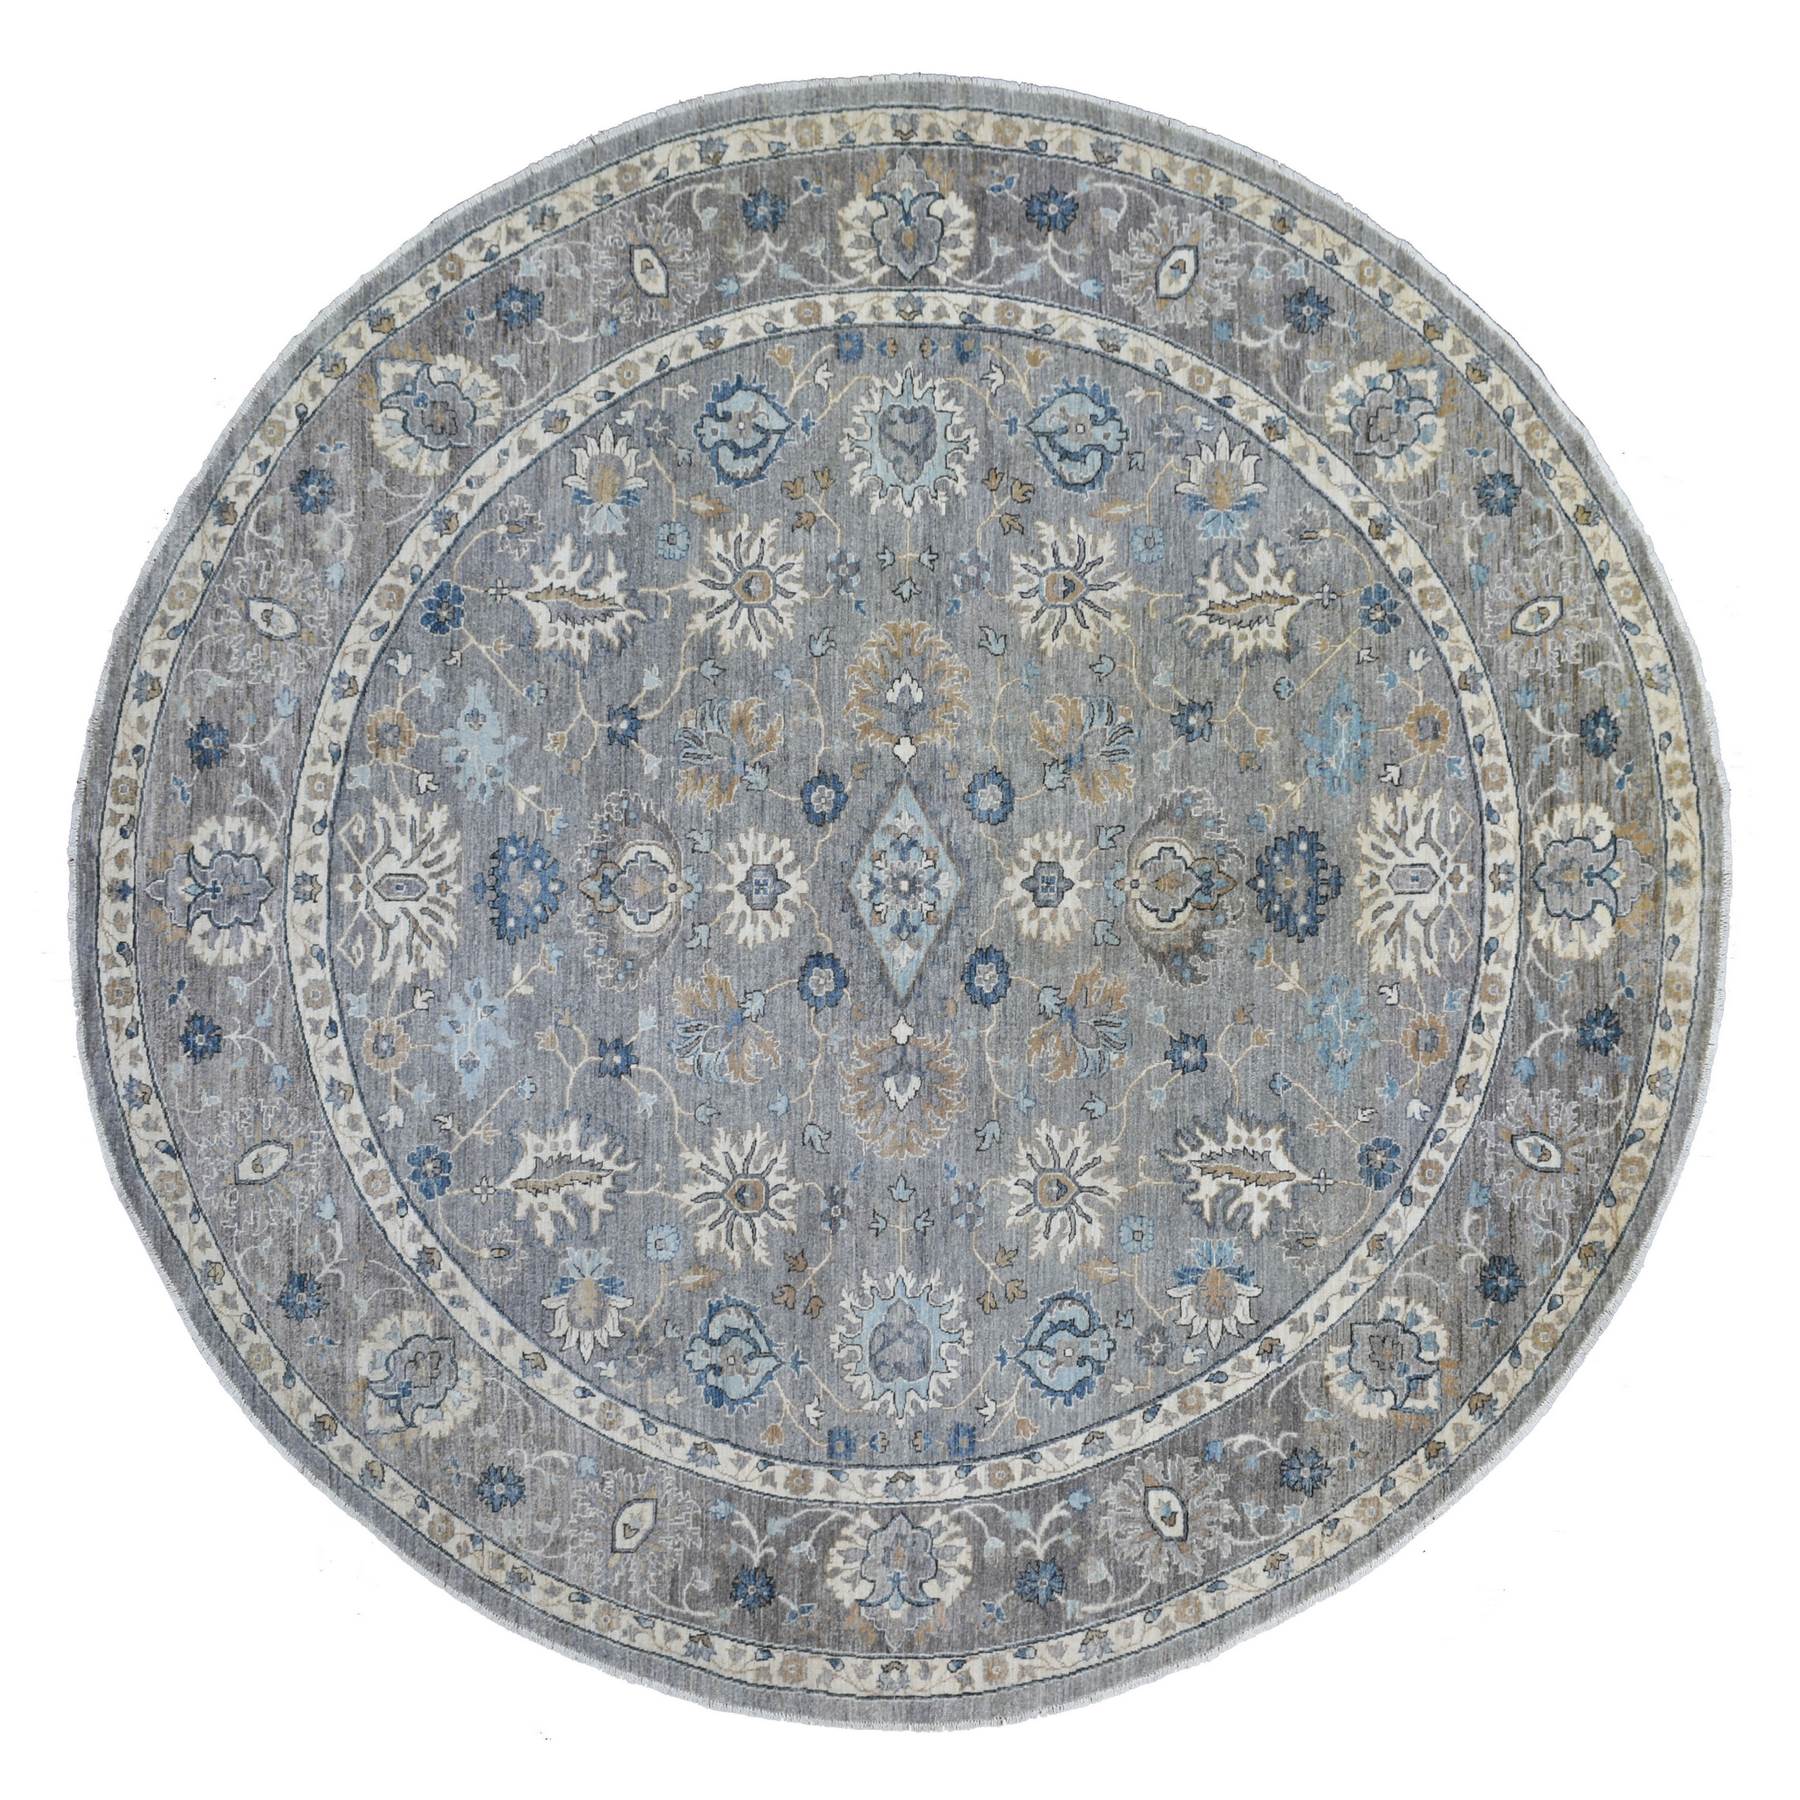 10'8"x10'8" Gray, Fine Peshawar with All Over Motifs, Densely Woven, Hand Woven, Organic Wool Round Oriental Rug 